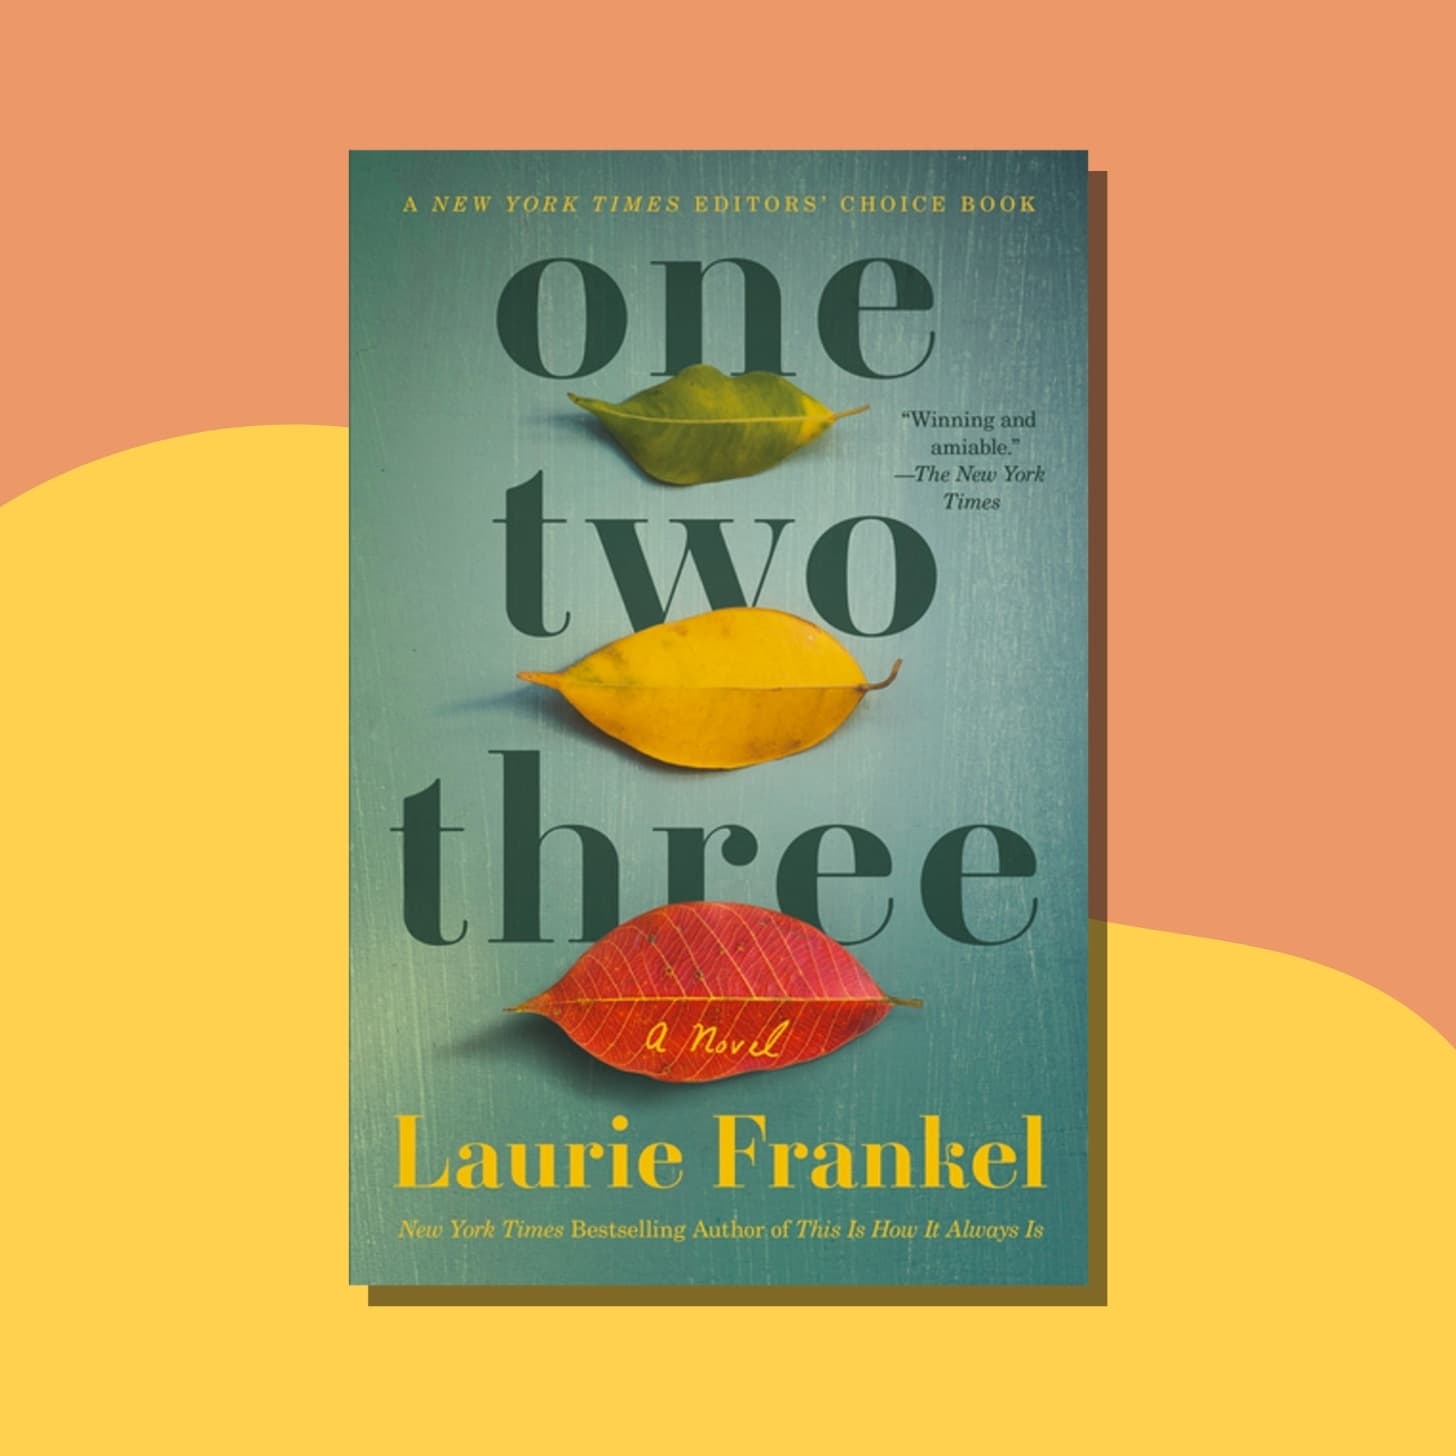 “One Two Three” by Laurie Frankel